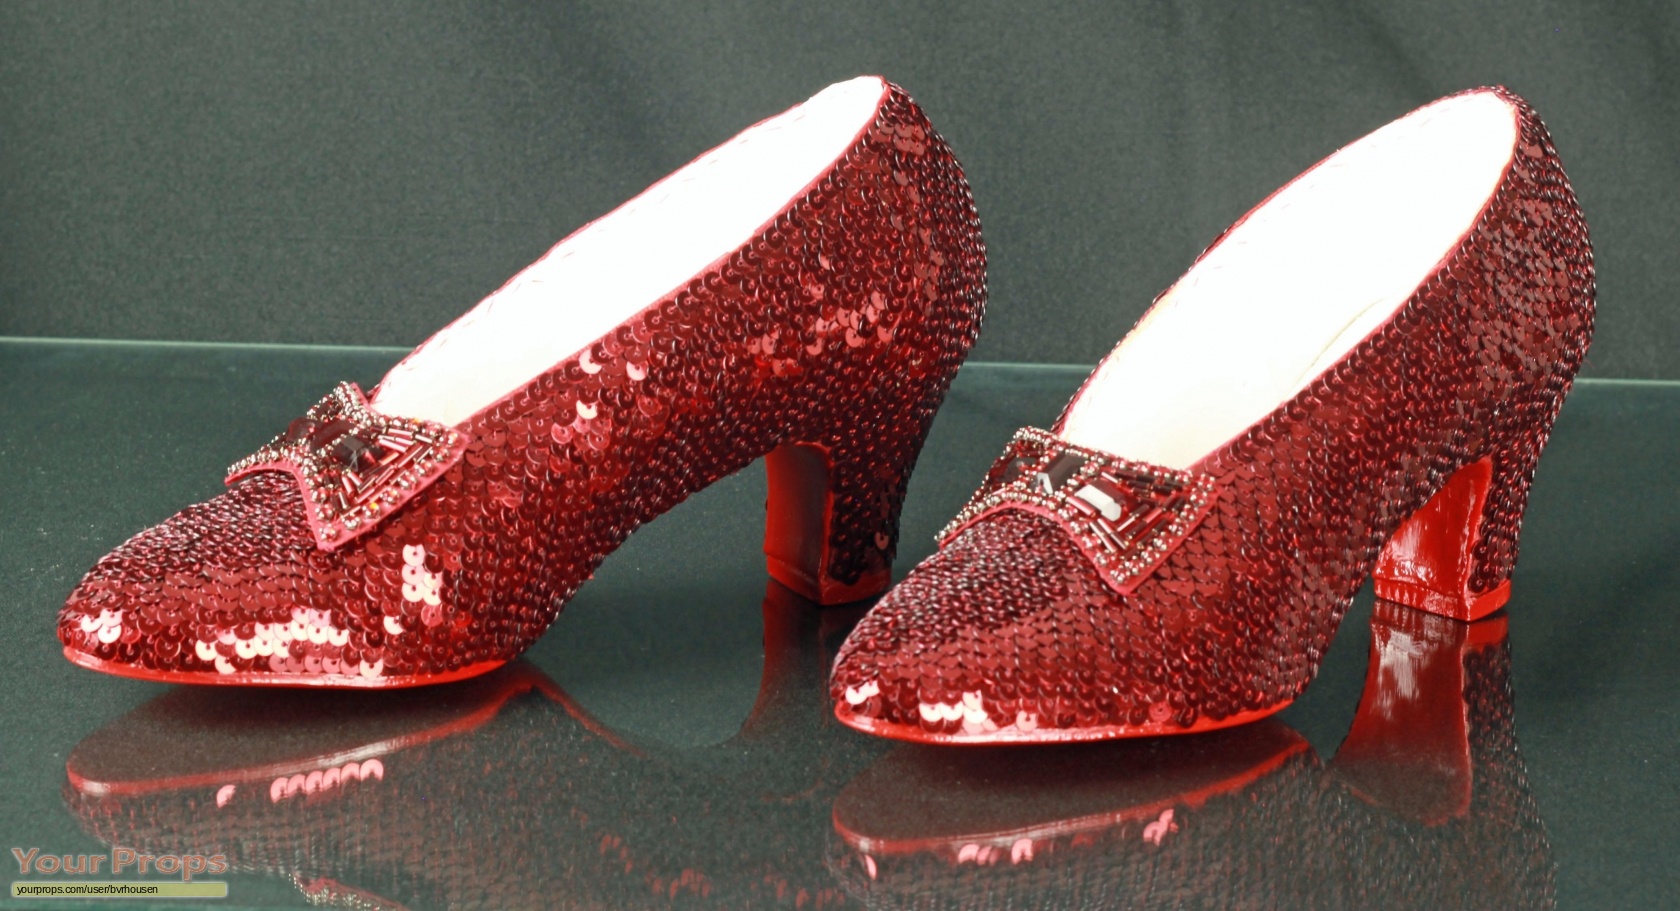 The Wizard of Oz Ruby Slippers replica movie costume1680 x 911